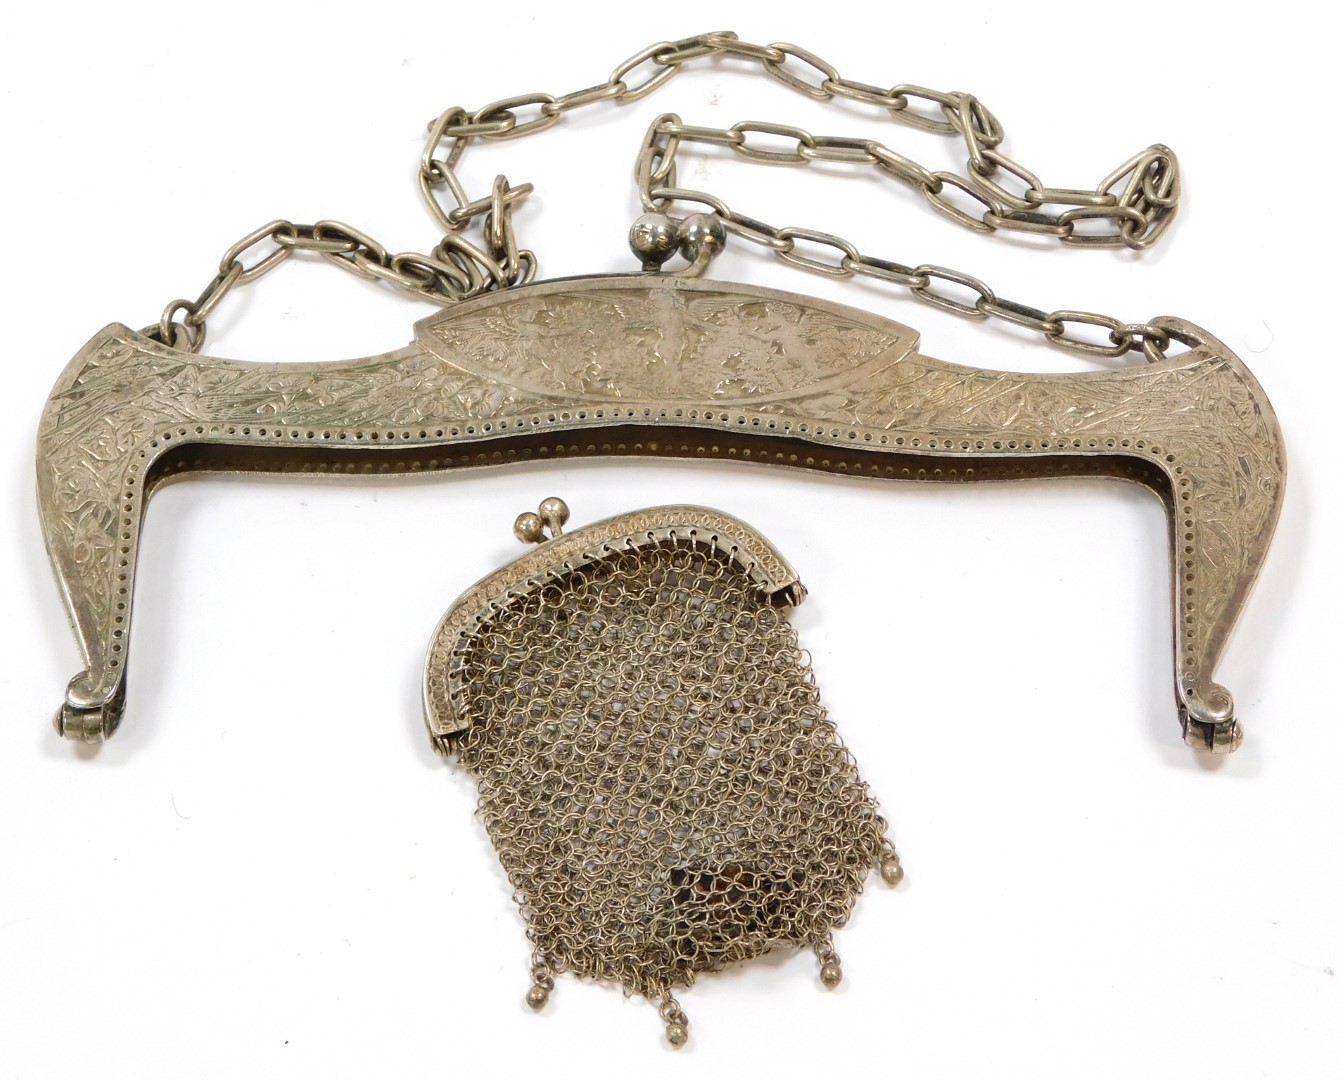 A Continental late 19thC bag clasp and chain, metal stamped 800, engraved with cherubs, birds and